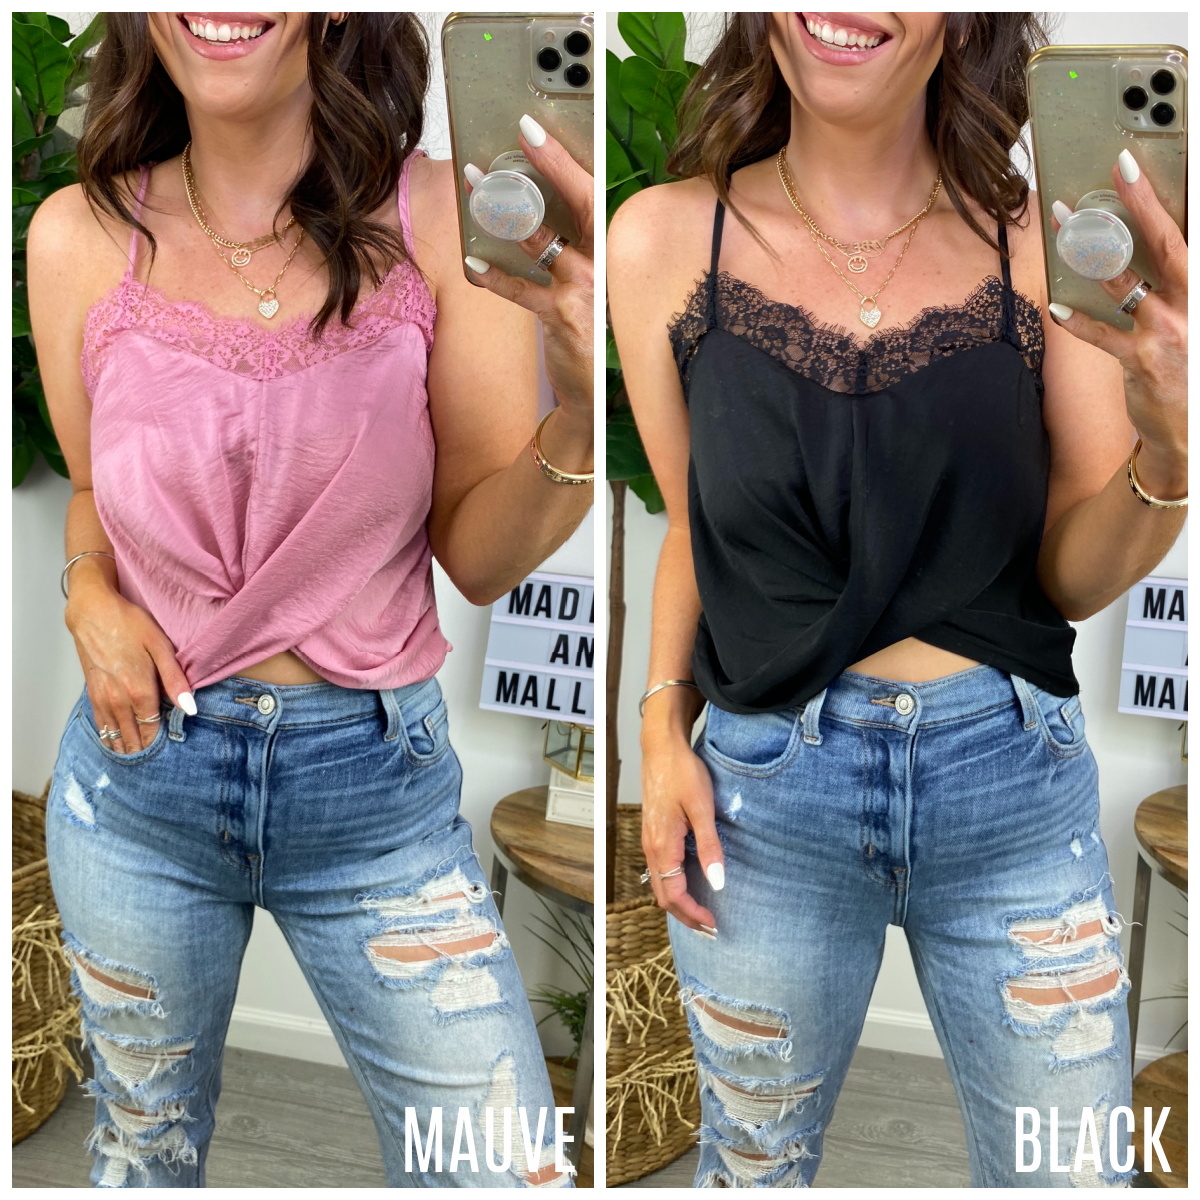  Must Be a Twist Front Lace Tank Top - Madison and Mallory